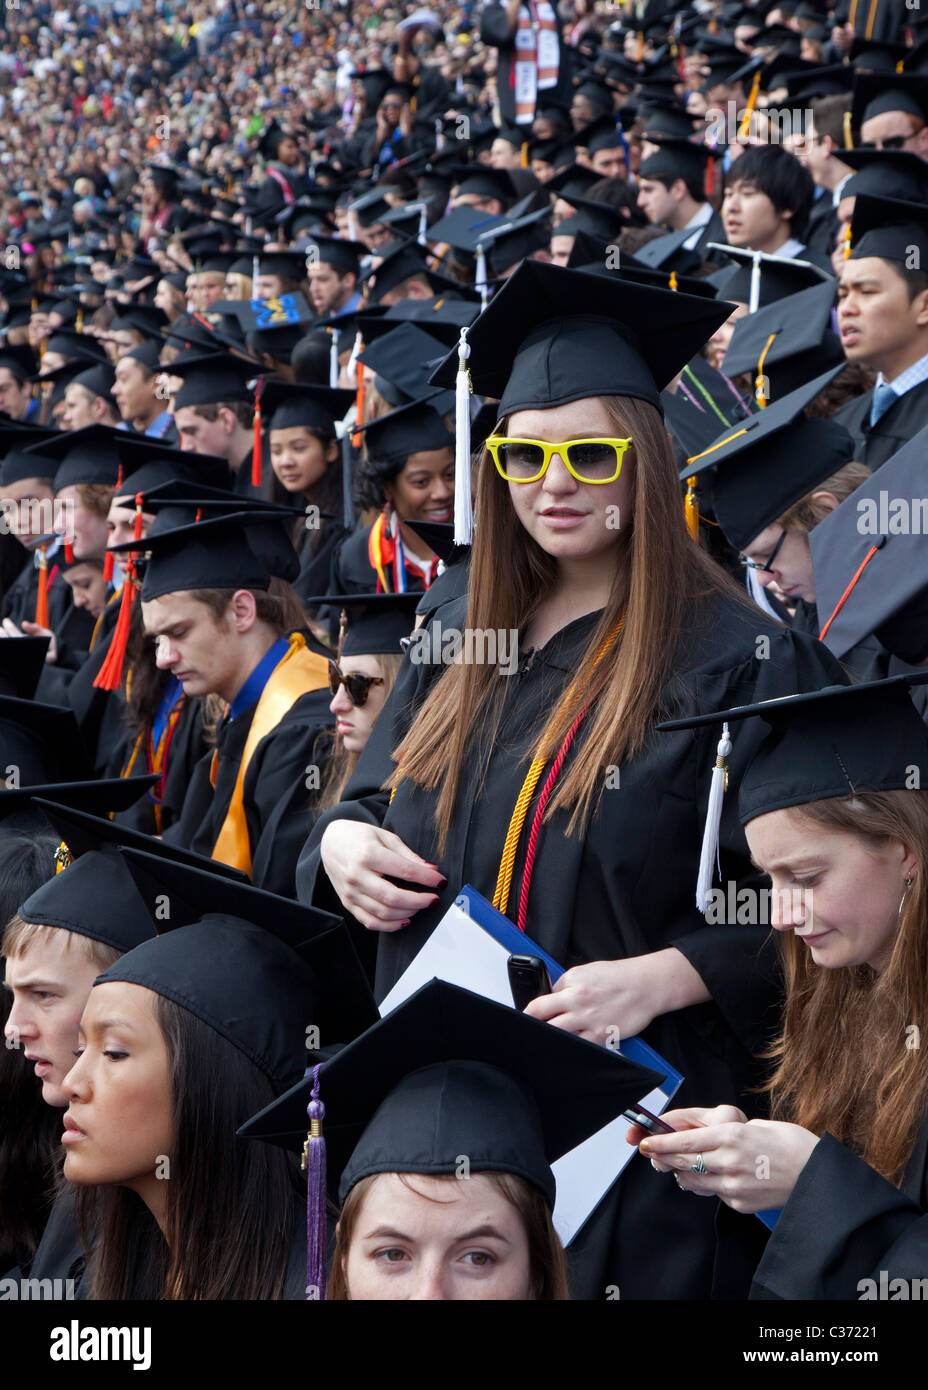 Ann Arbor, Michigan - Graduating students at the University of Michigan's commencement cememony. Stock Photo